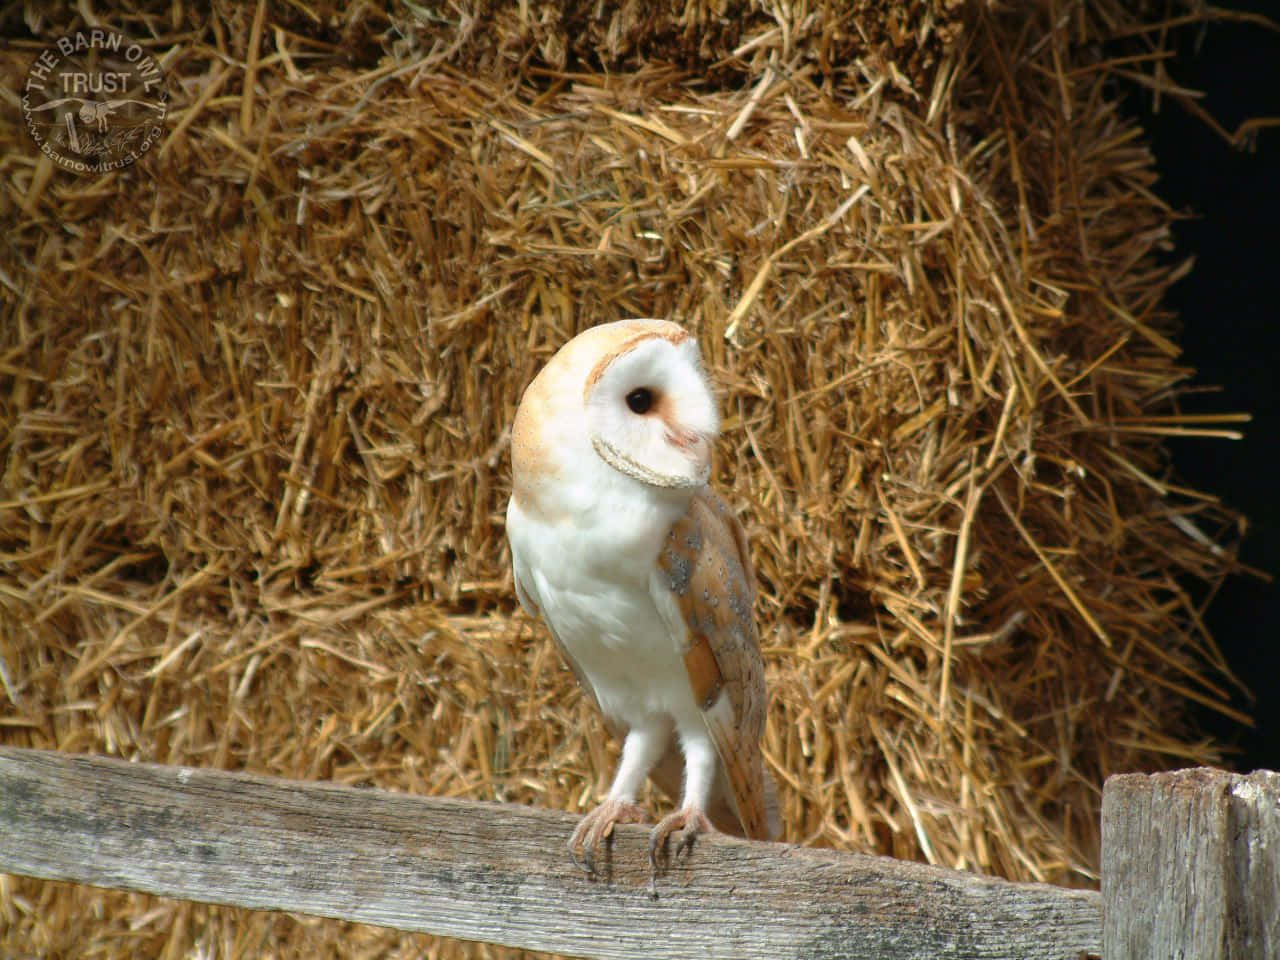 A barn owl stretching its wings in the new morning light